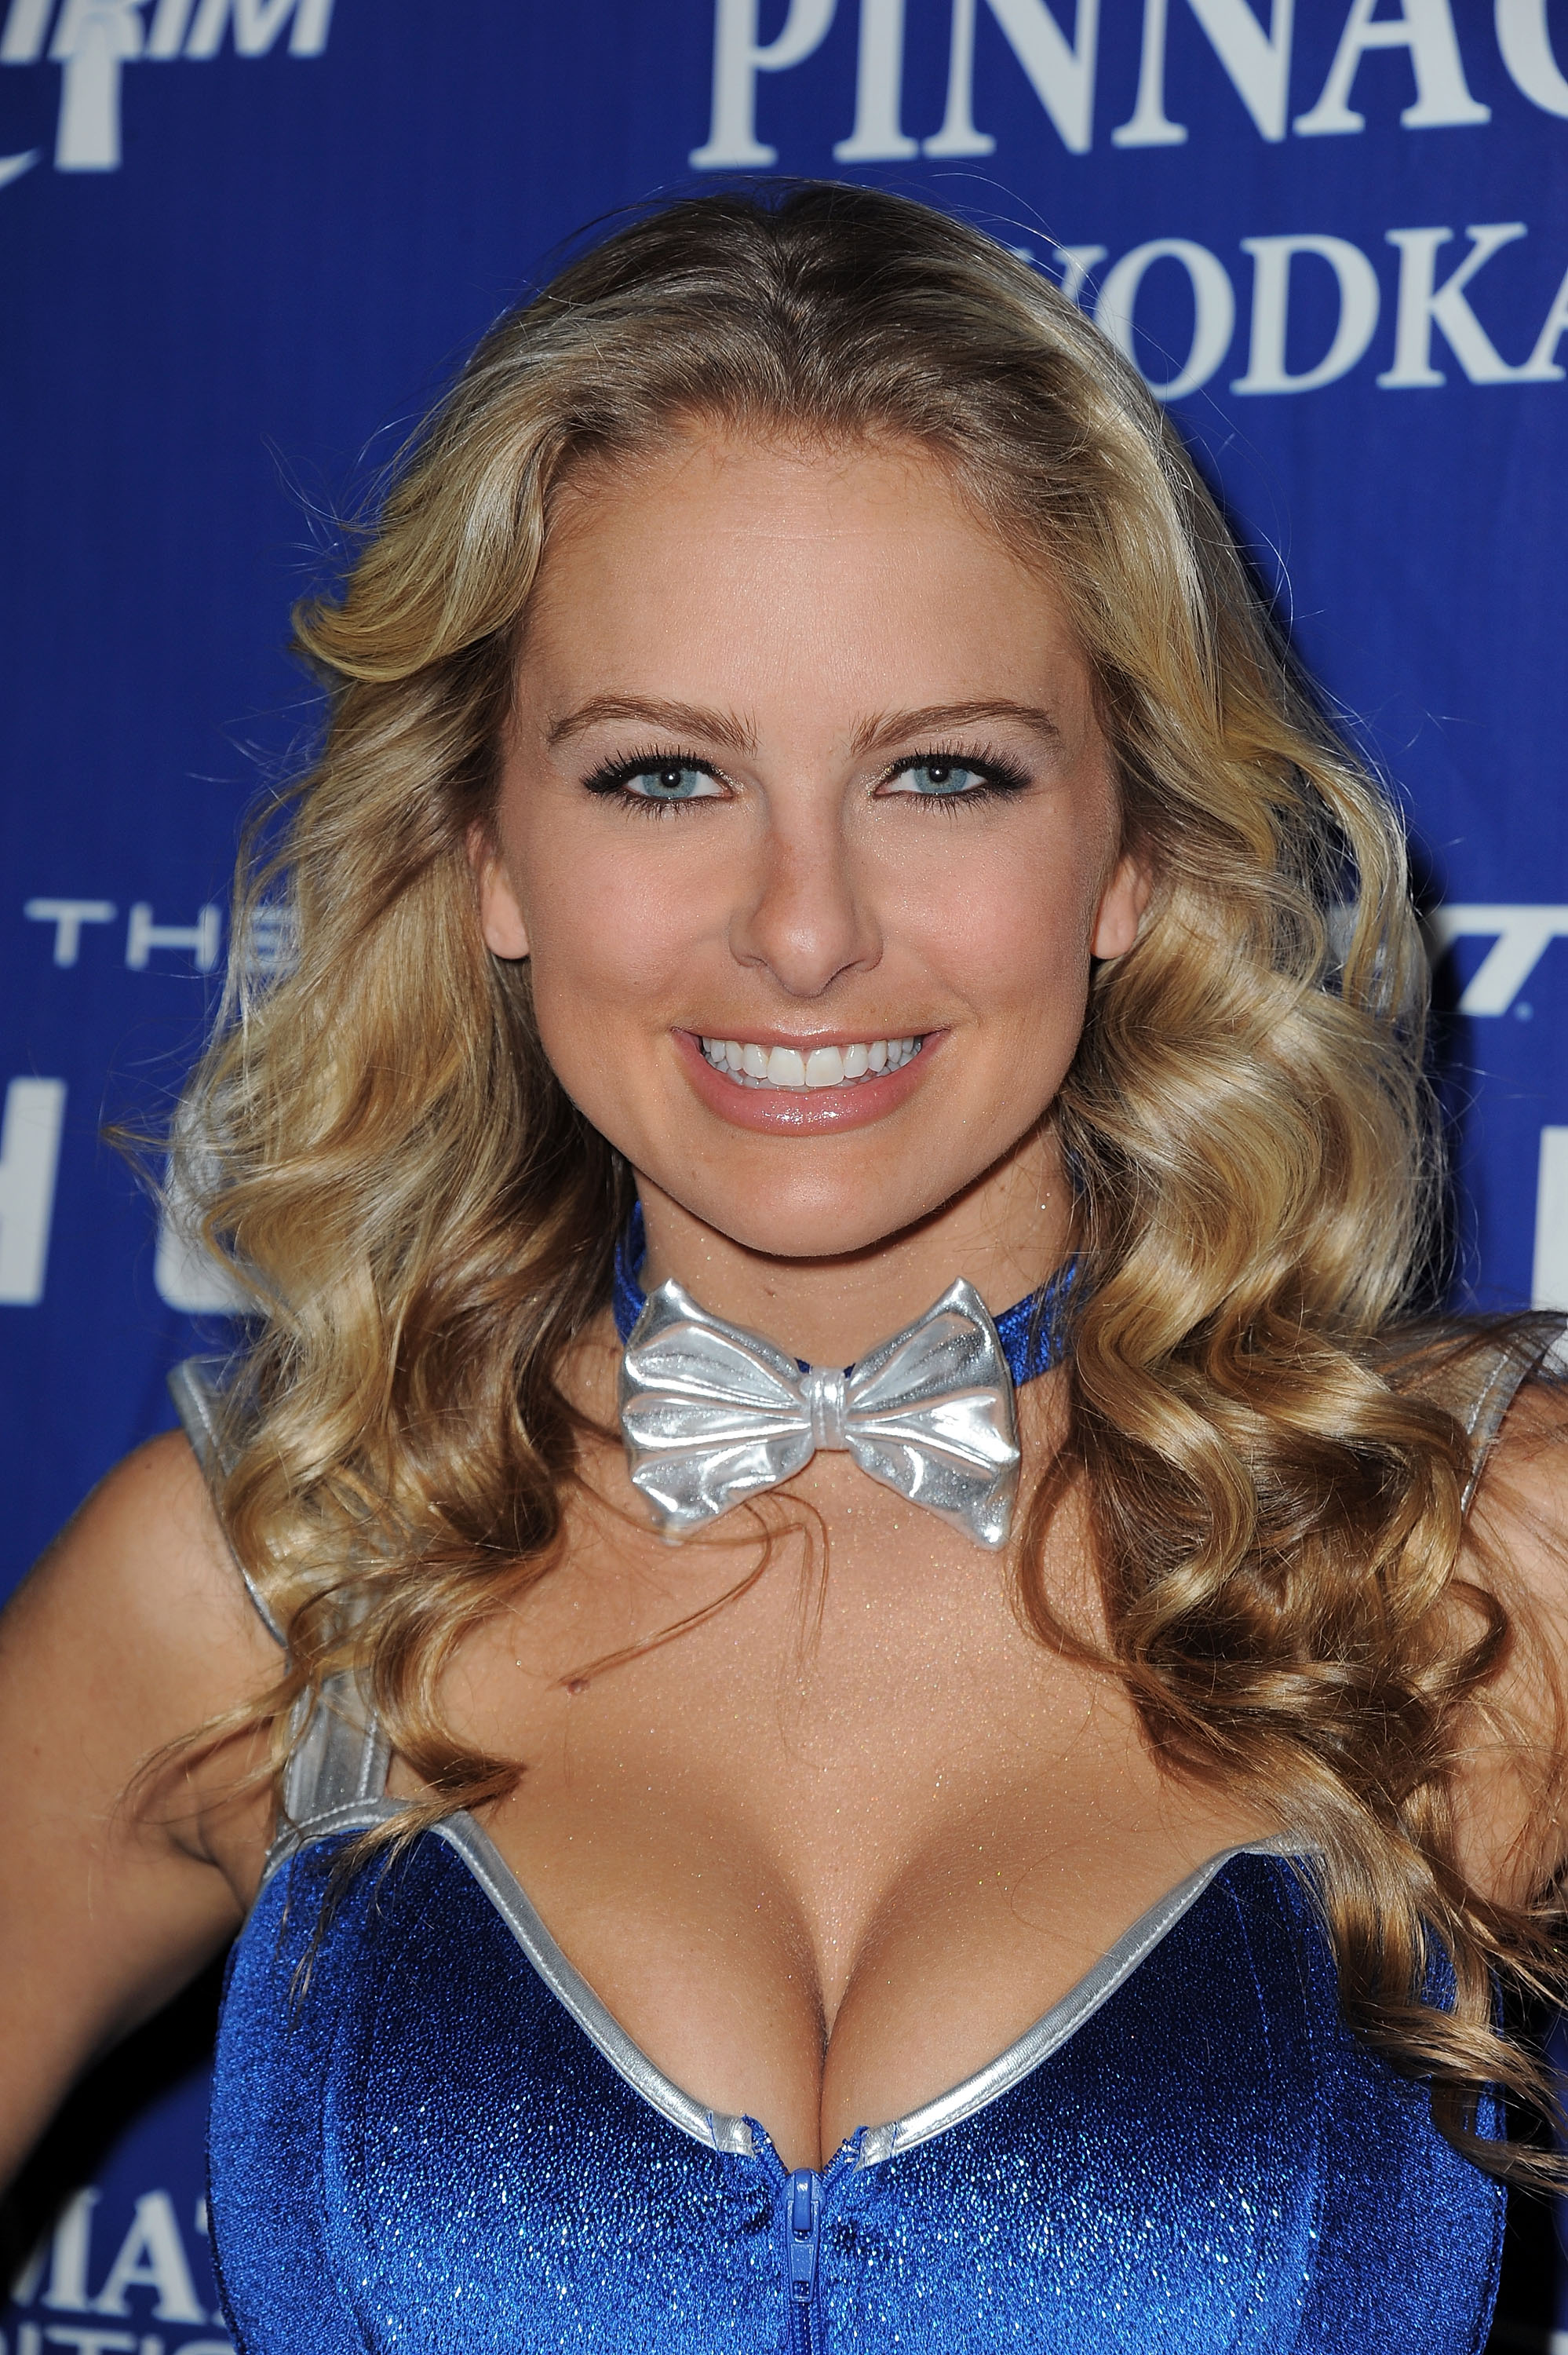 Playboy Playmate Shanna McLaughlin Arrested In Fla On Gun Charge CBS News